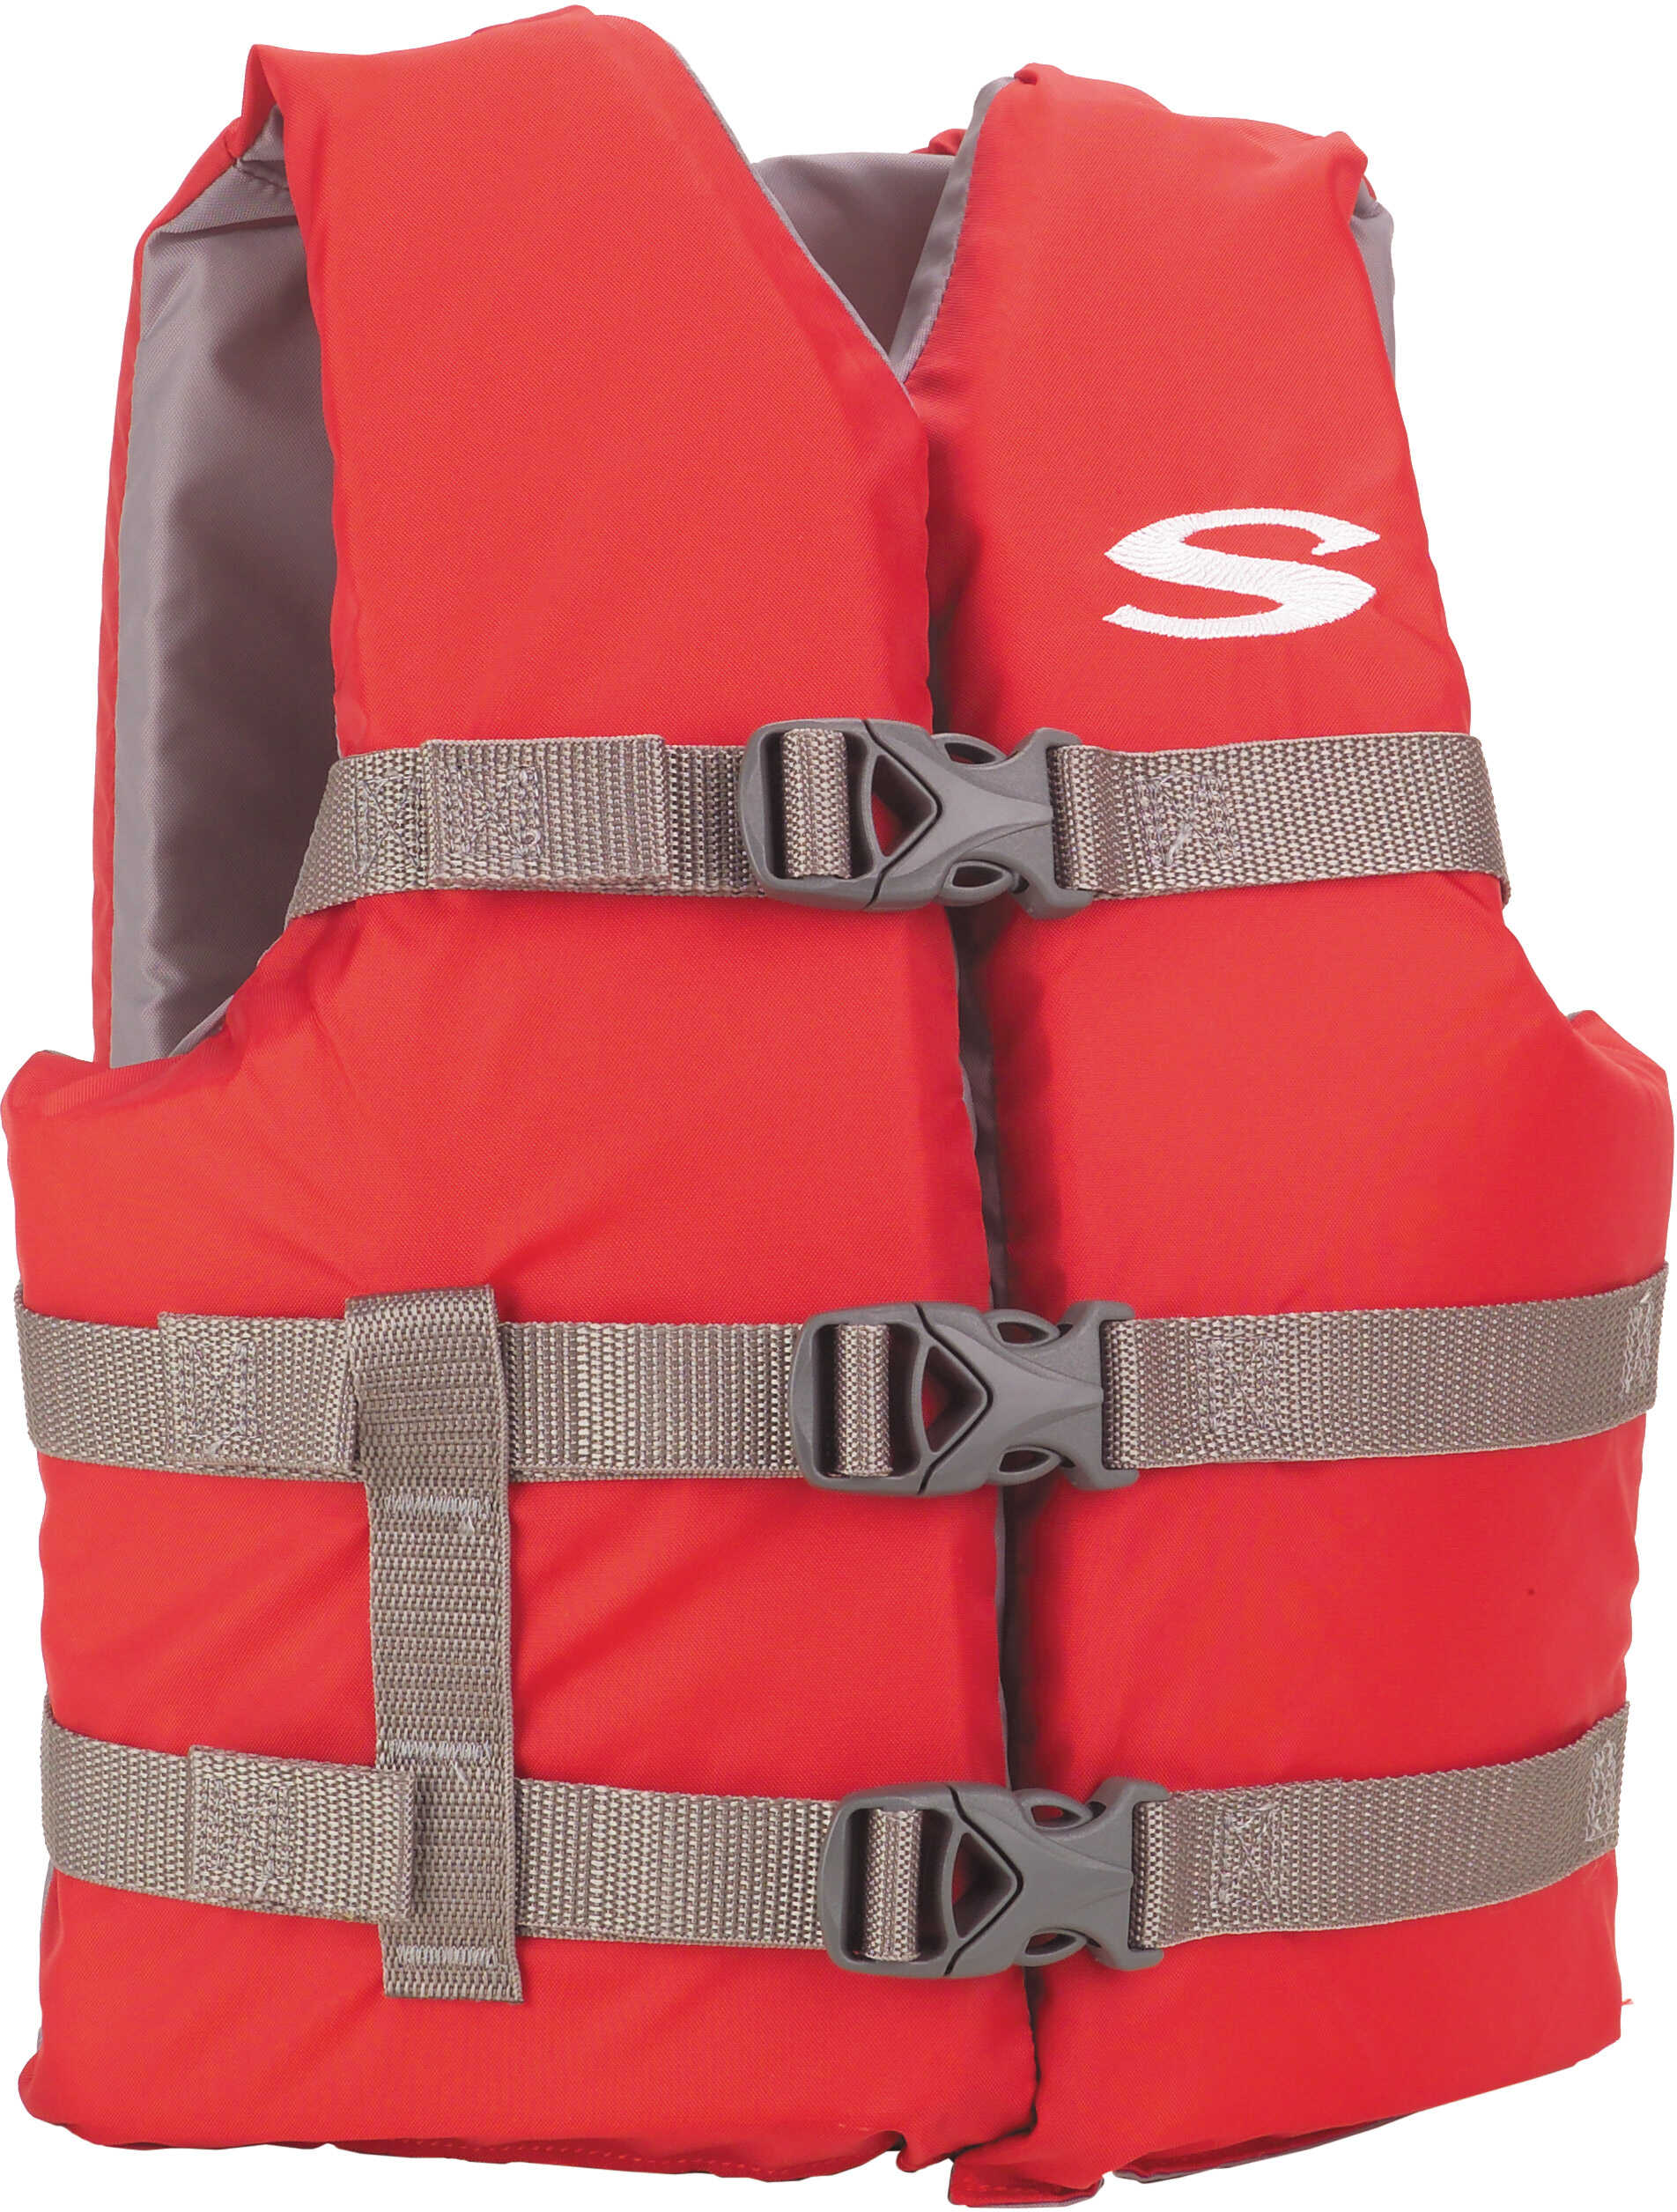 Stearns Youth Classic Boating PFD Red Md: 3000001415